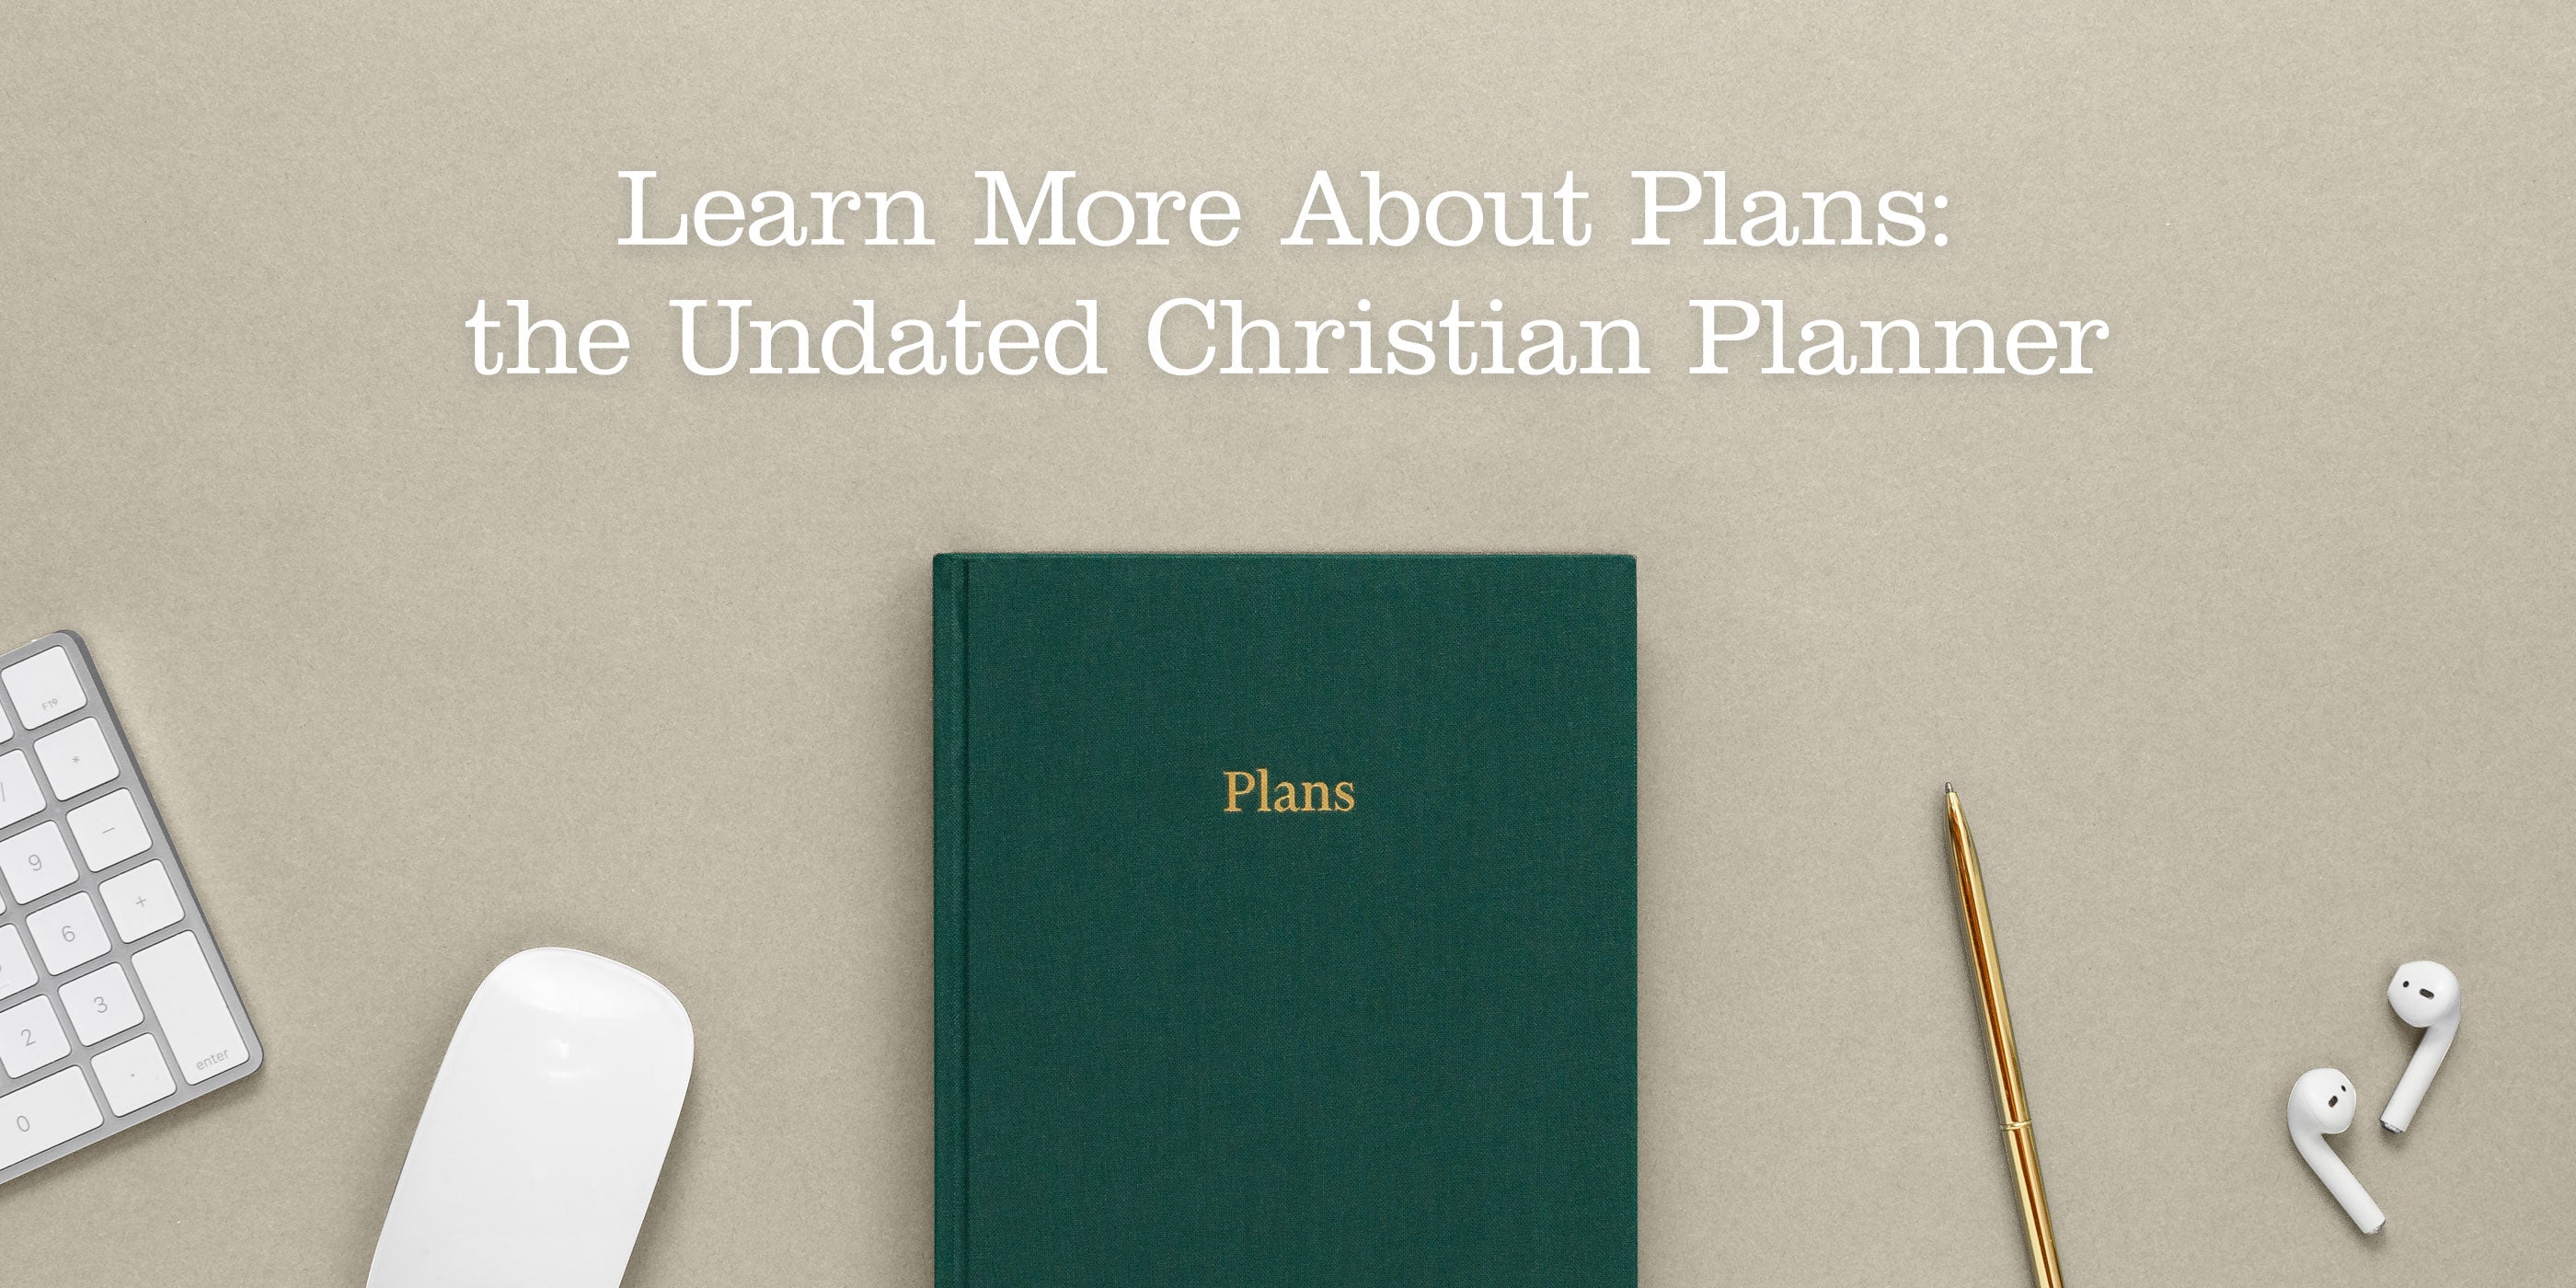 Learn more about Plans: the Undated Christian Planner. Desk scene with a keyboard, mouse, planner, brass pen, and wireless earbud headphones.